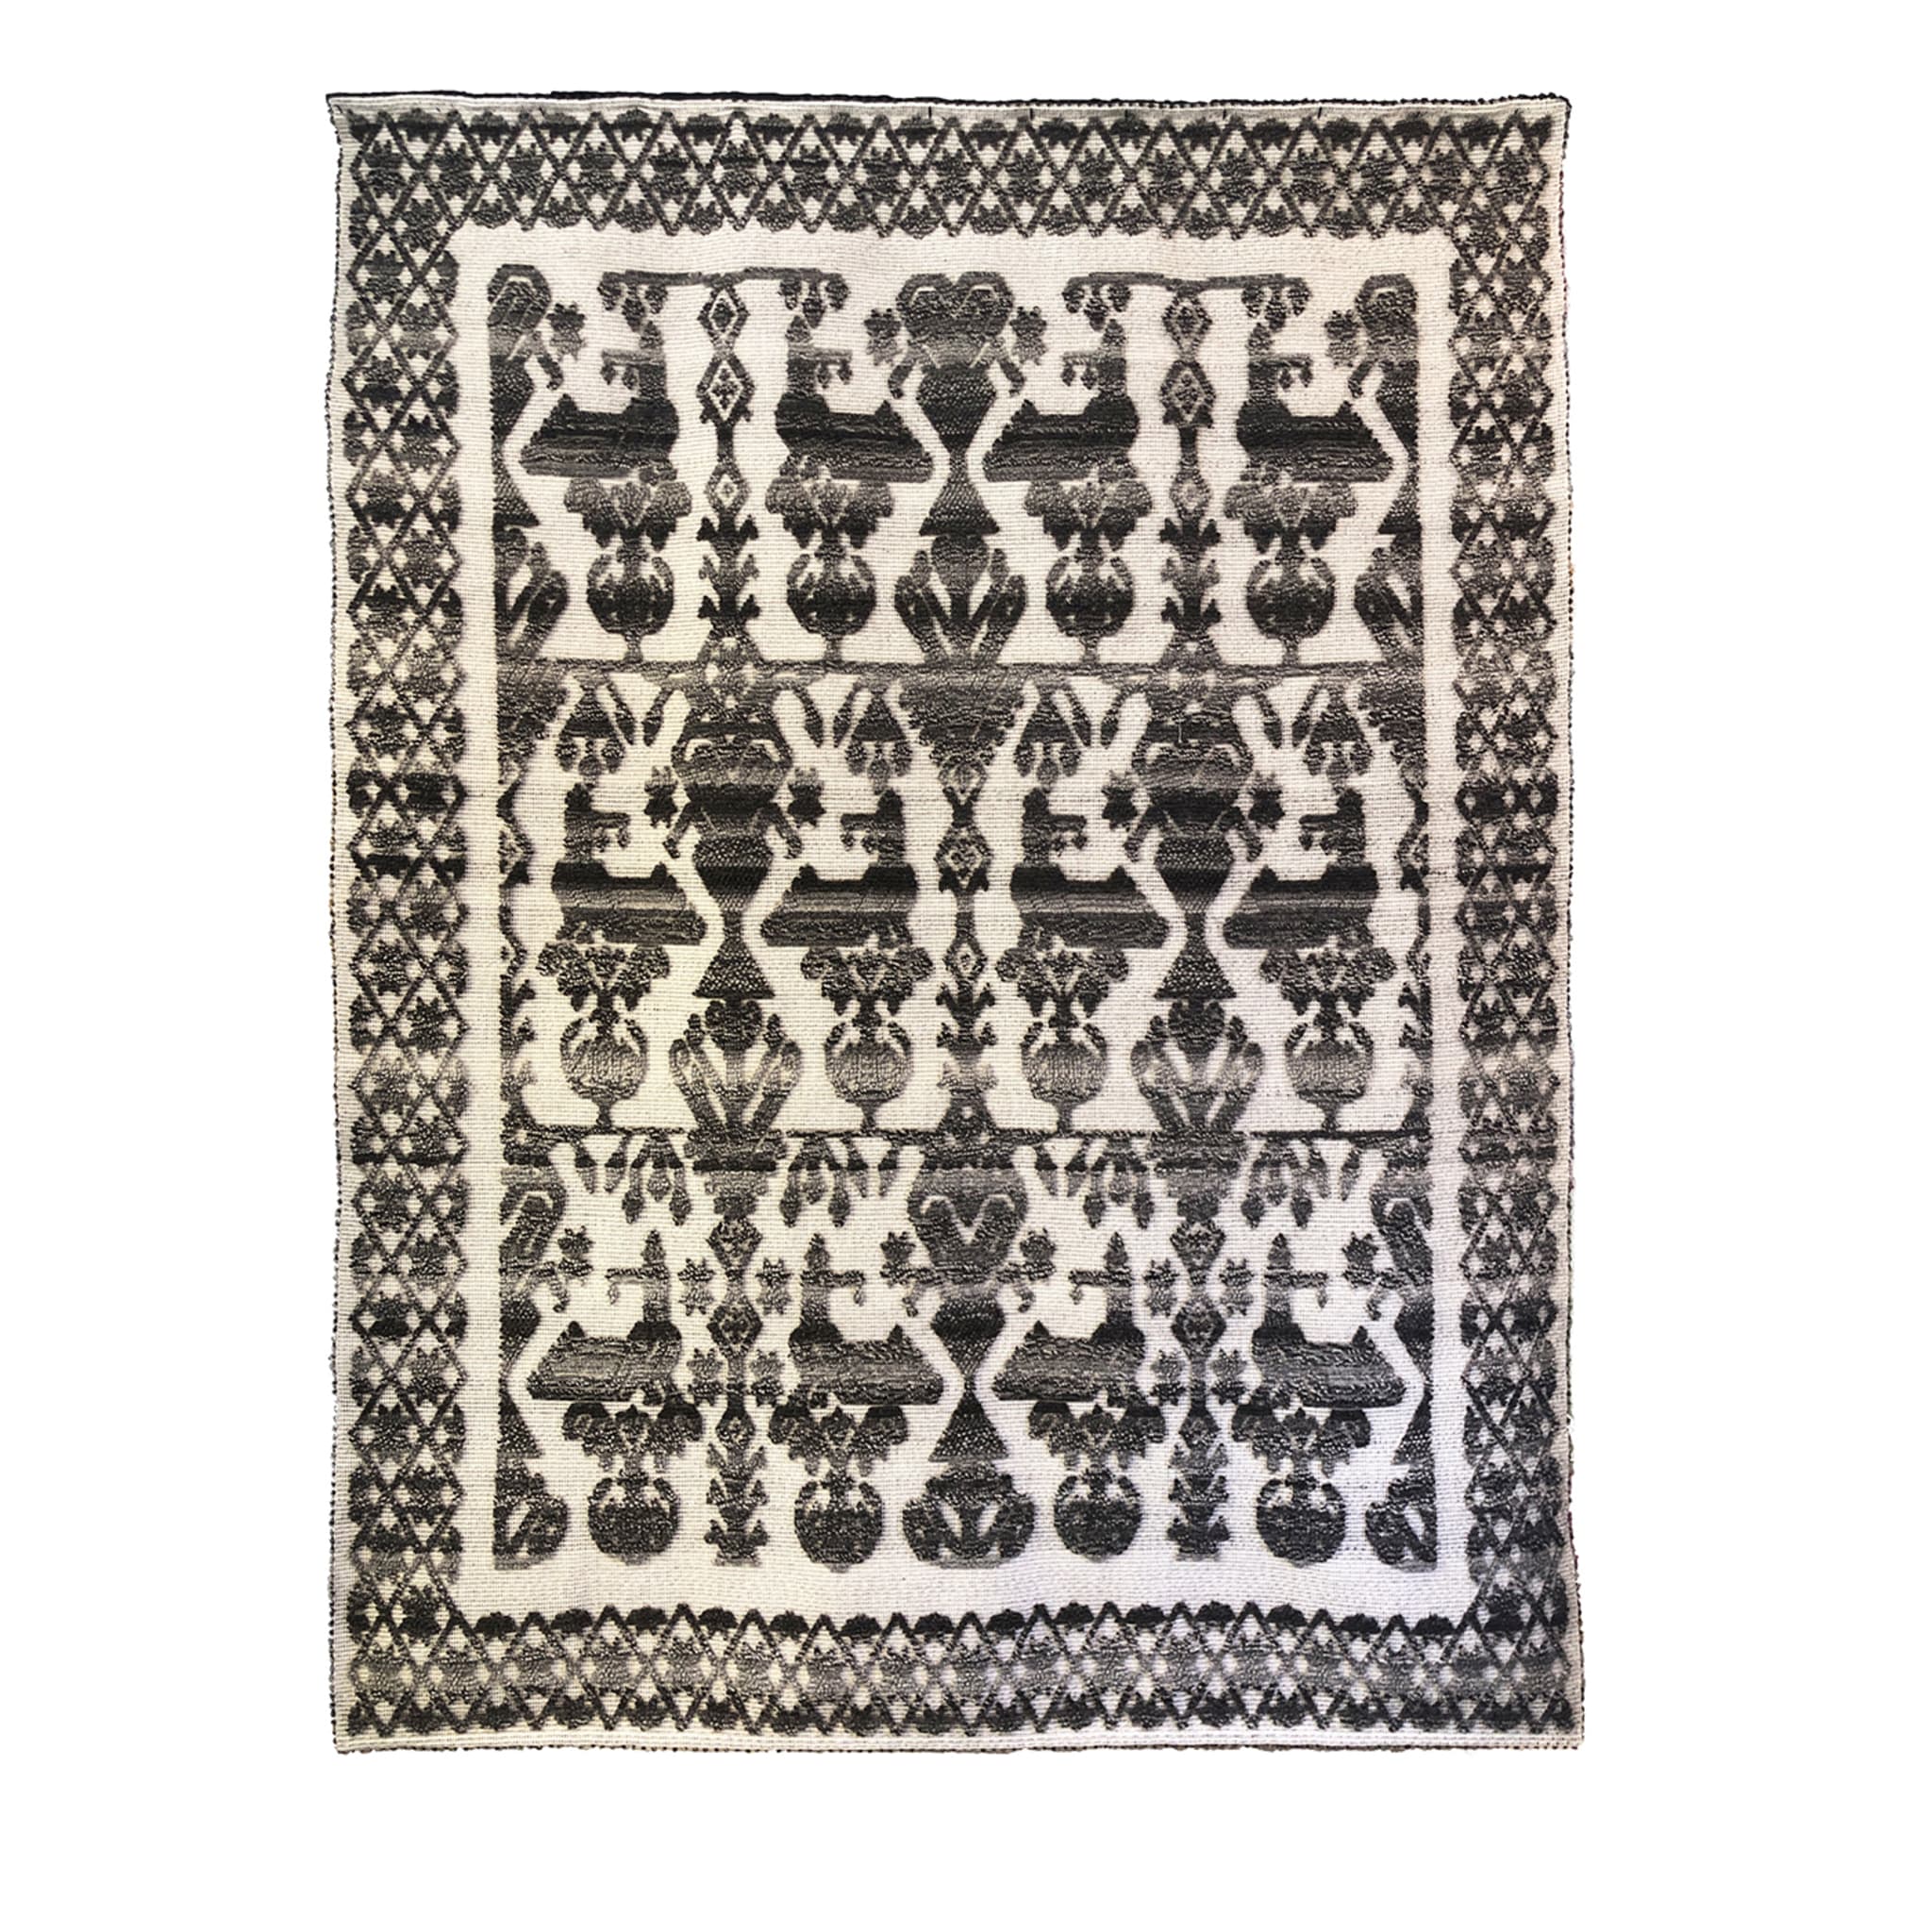 Uccello Fiorito Patterned Rug - Main view